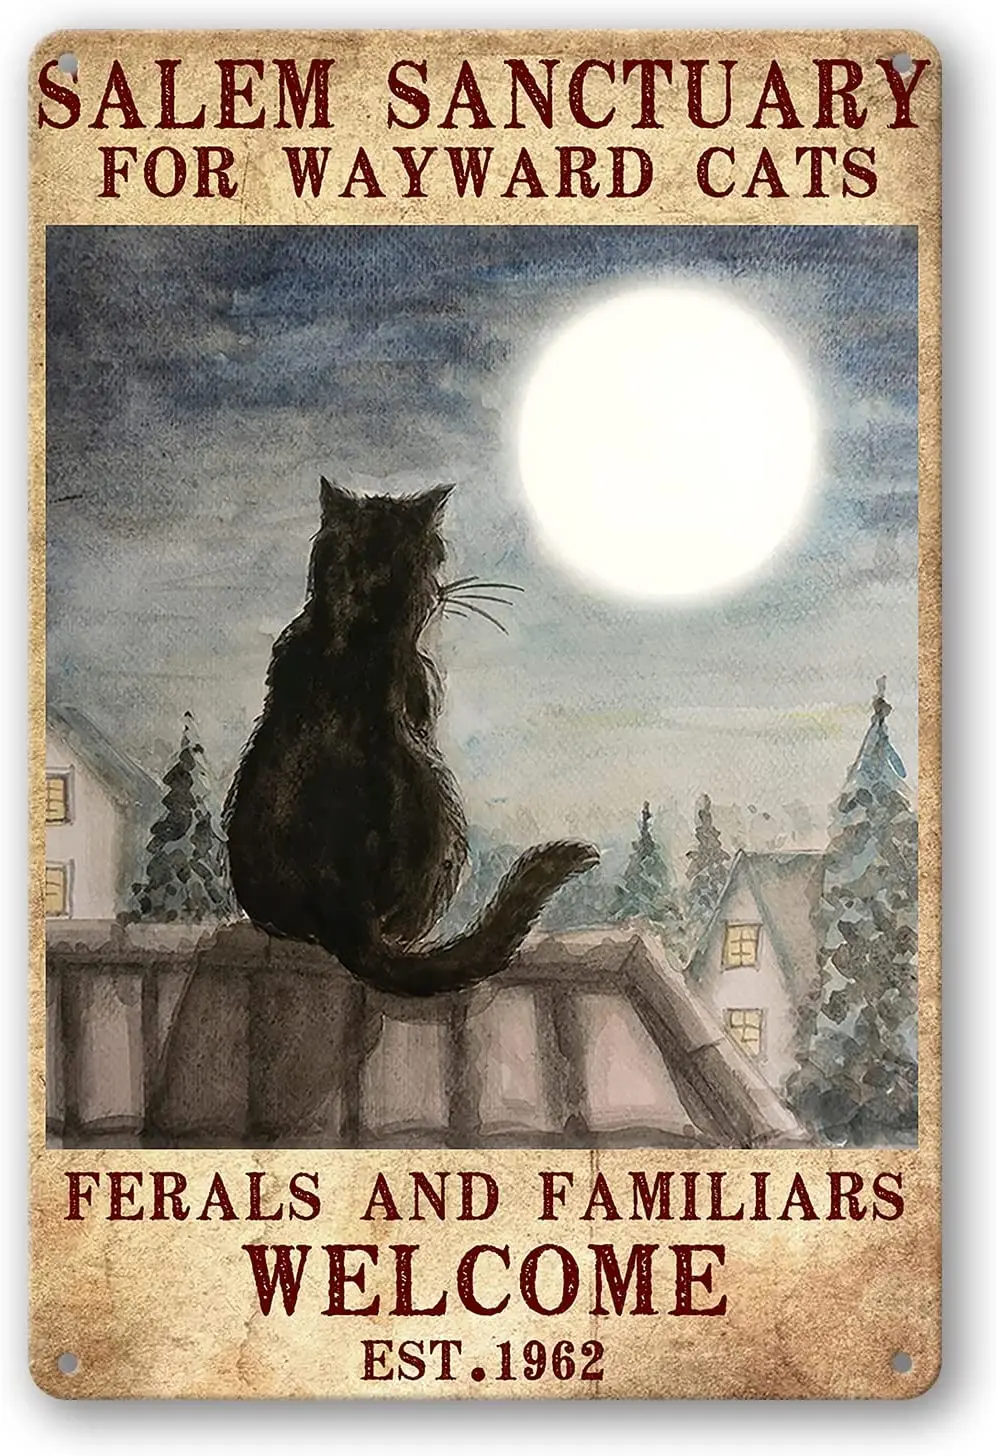 

Salem Sanctuary For Wayward Cats Ferals And Familiars Welcome Sign Metal Tin Signs, Vintage Black Cat Art Poster Plaque